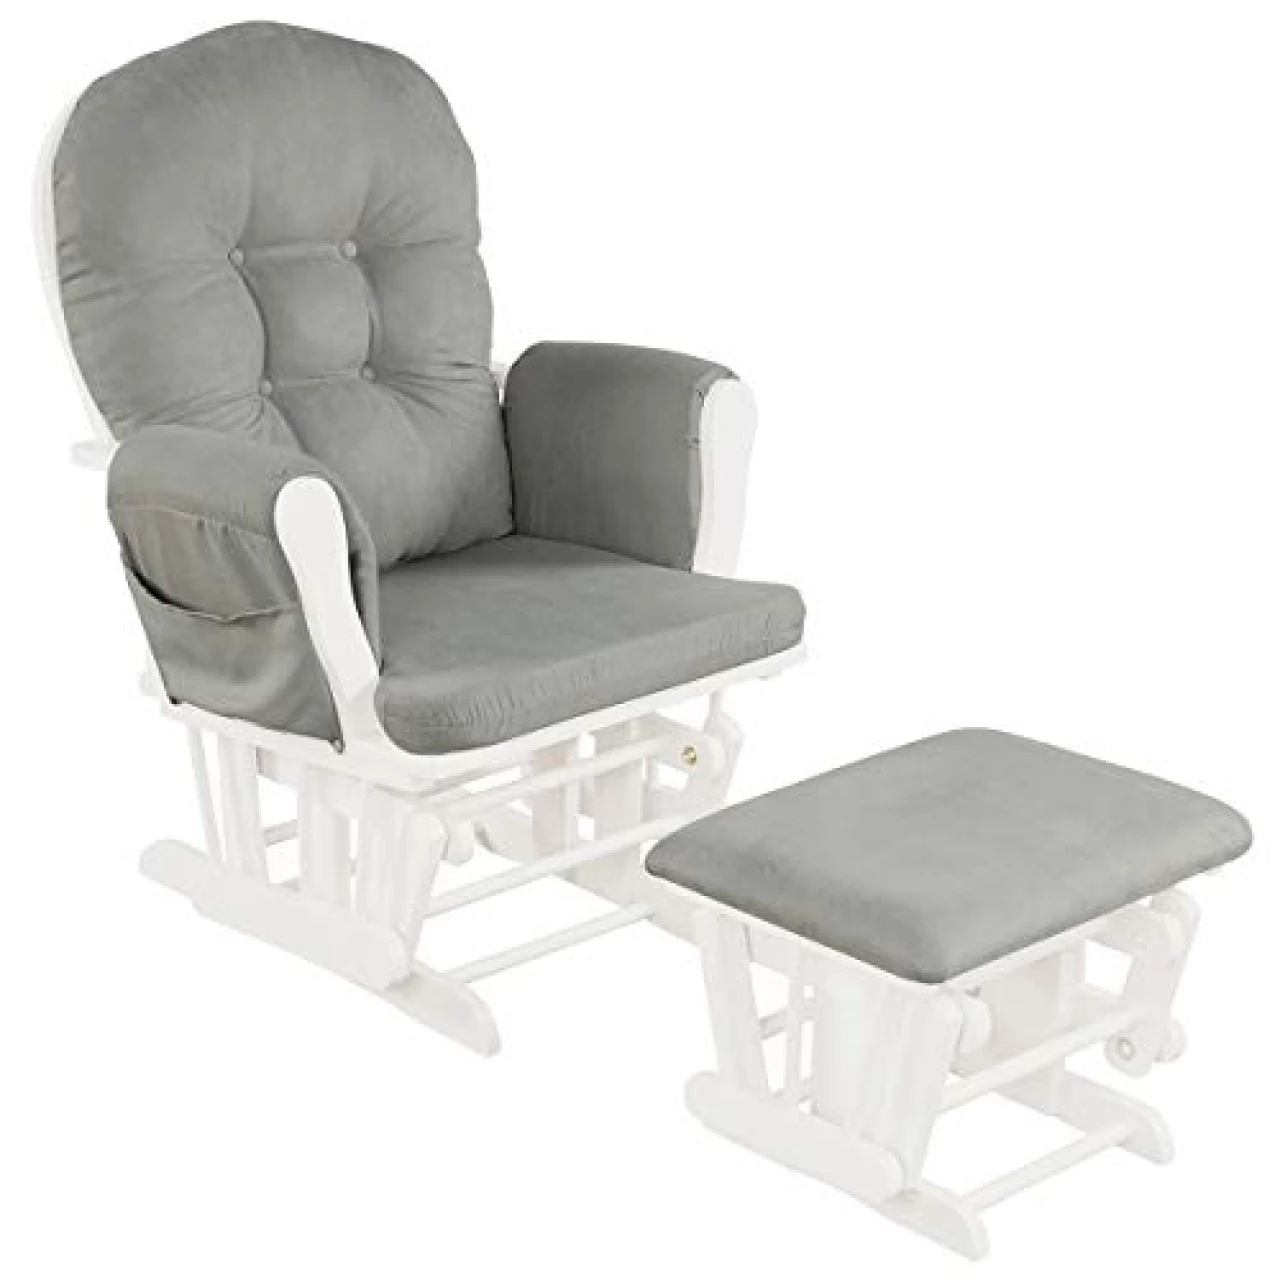 Costzon Nursery Glider with Ottoman, Upholstered Comfort Glider Rocker with Padded Cushion, Storage Pocket, Solid Wood Base, Rocking Chair Nursery for Breastfeeding, Maternity, Napping (Light Gray)